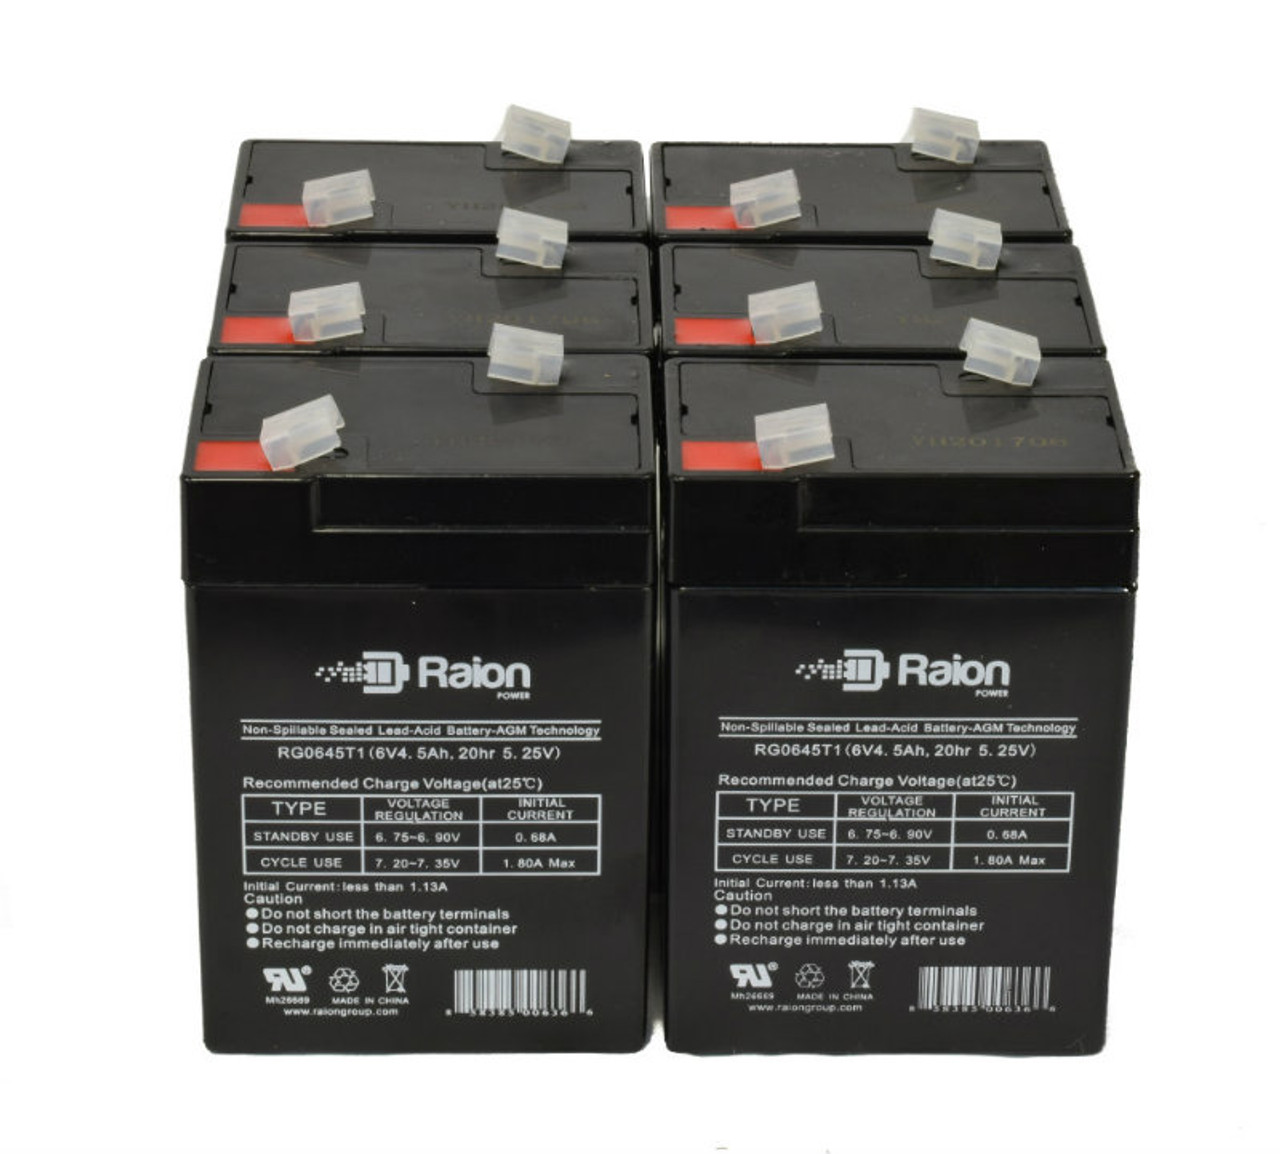 Raion Power 6 Volt 4.5Ah RG0645T1 Replacement Battery for Power Patrol BSL0905 - 6 Pack